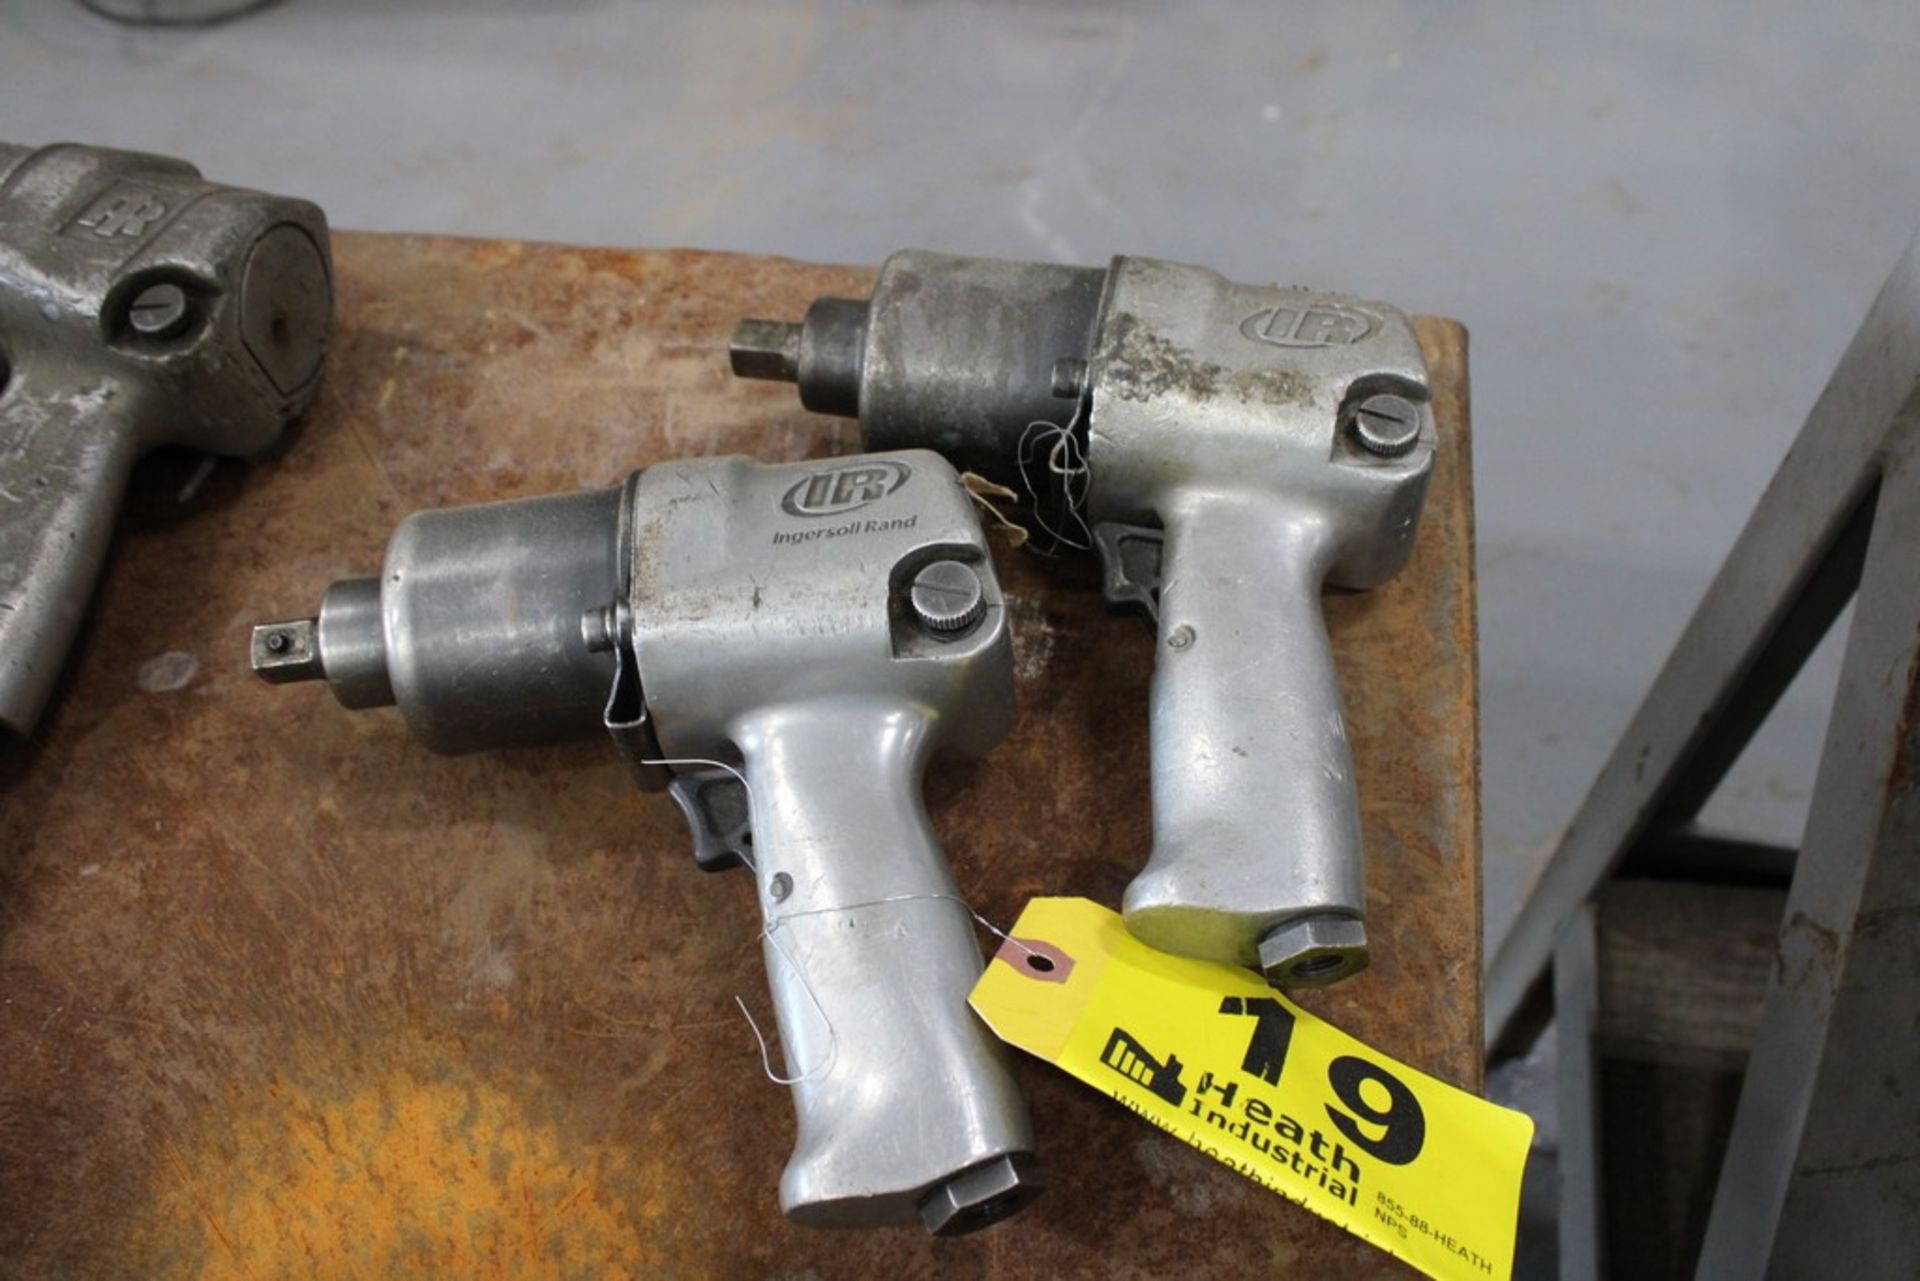 (2) INGERSOLL RAND NO. 2707P1 1/2" PNEUMATIC IMPACT WRENCHES